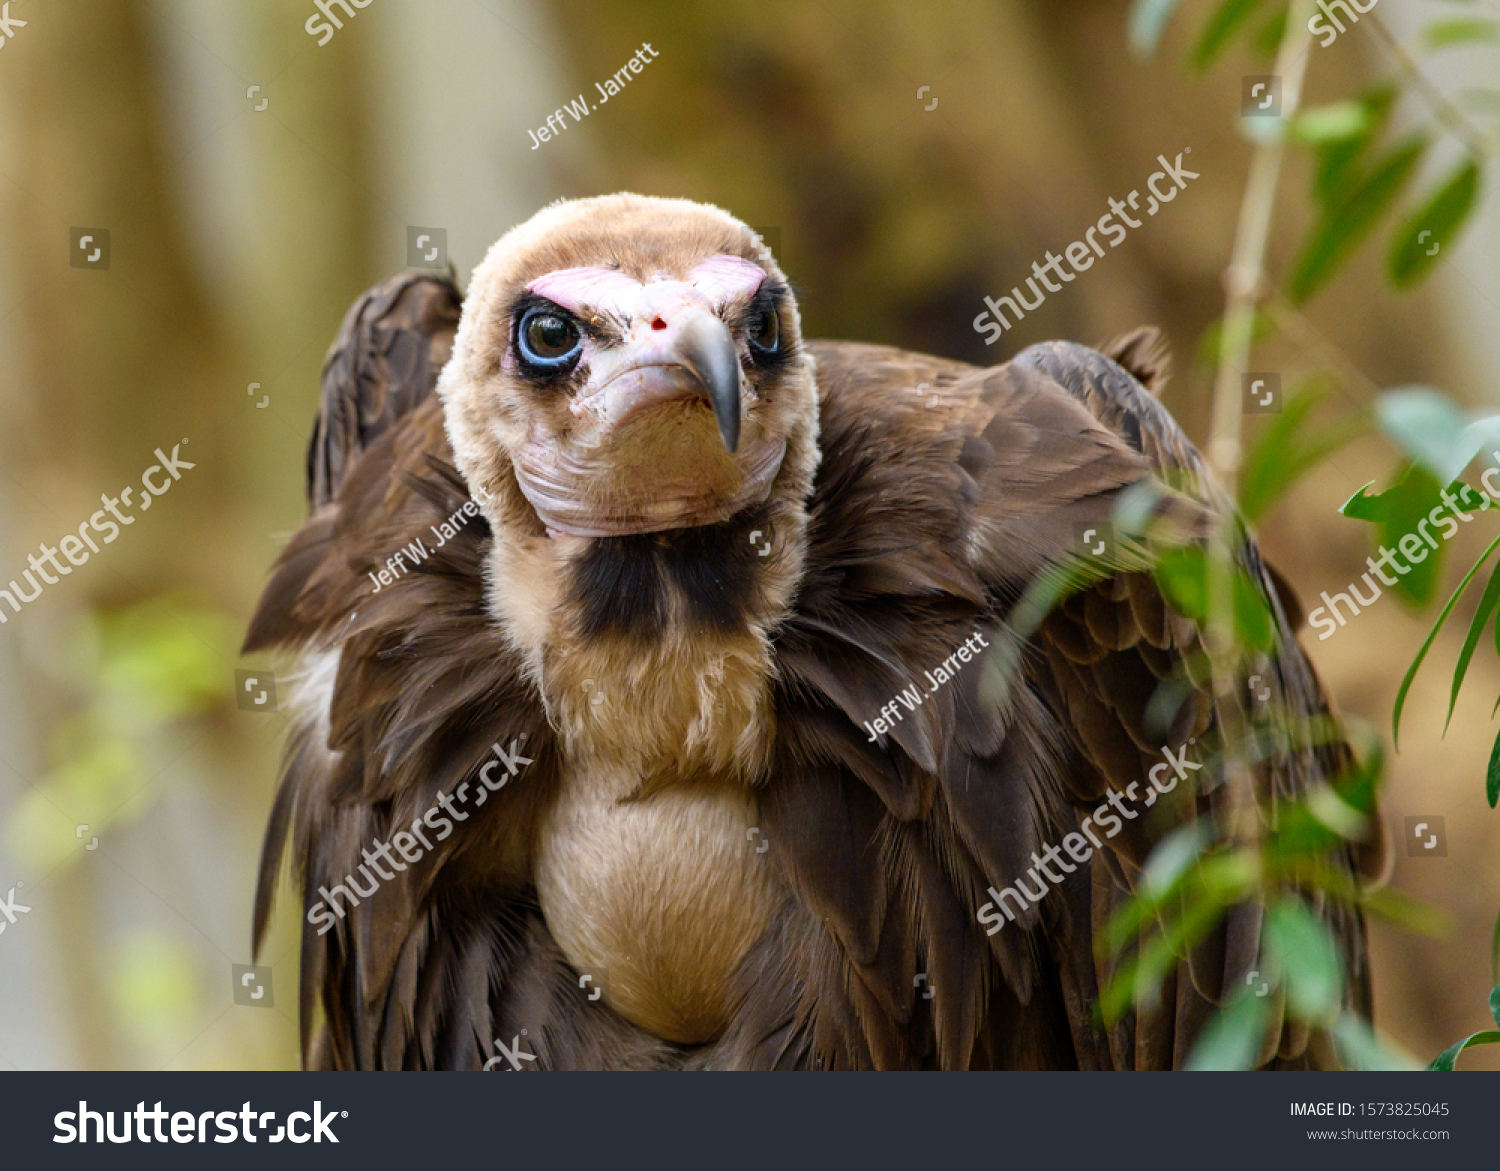 1,490 Hooded vulture Images, Stock Photos & Vectors | Shutterstock